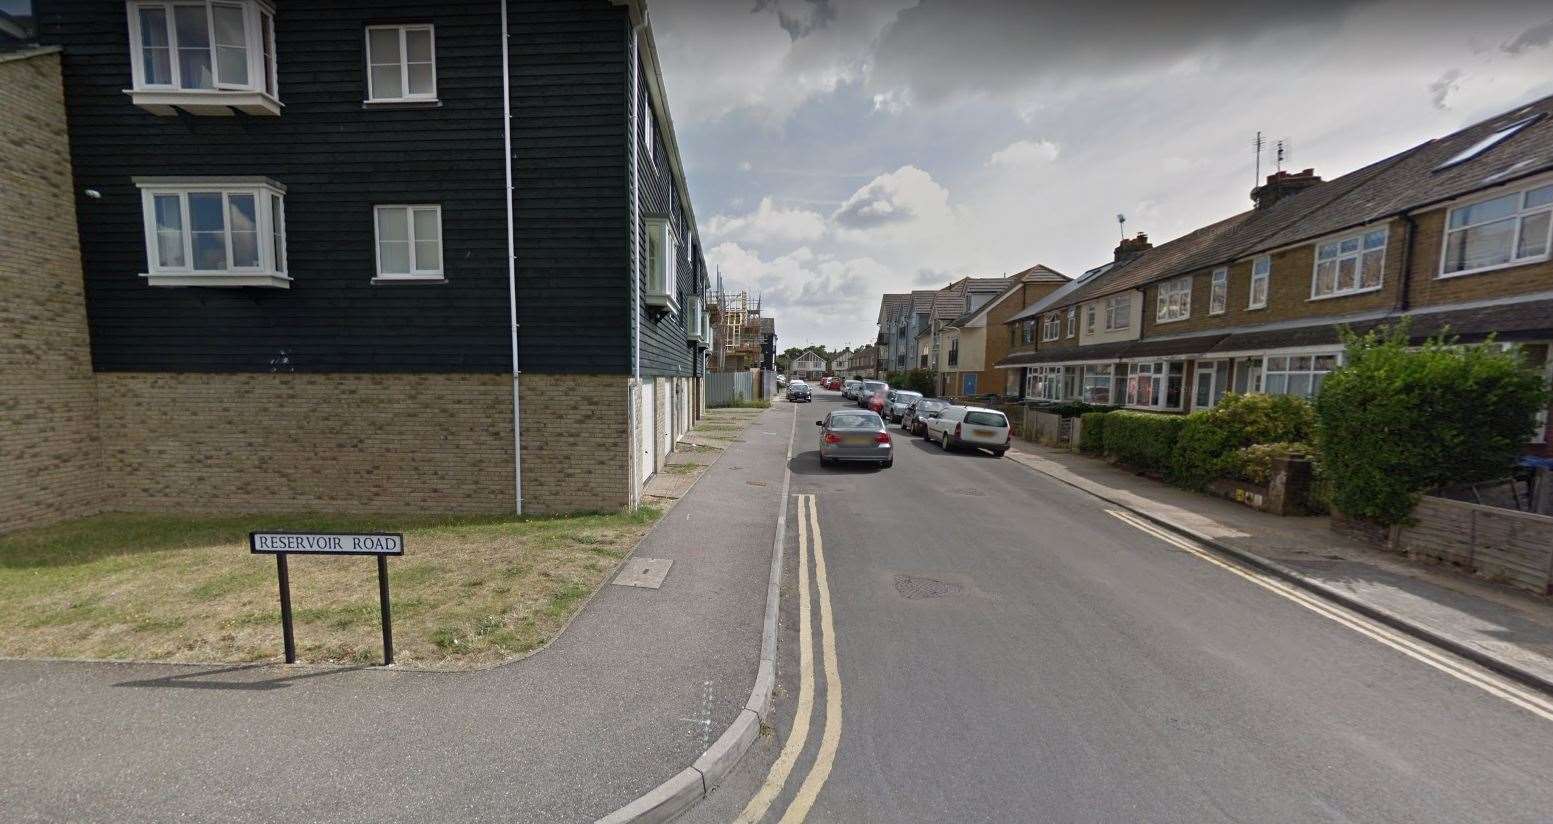 The incident took place on the corner of Diamond Road and Reservoir Road in Whitstable yesterday afternoon. Picture: Google